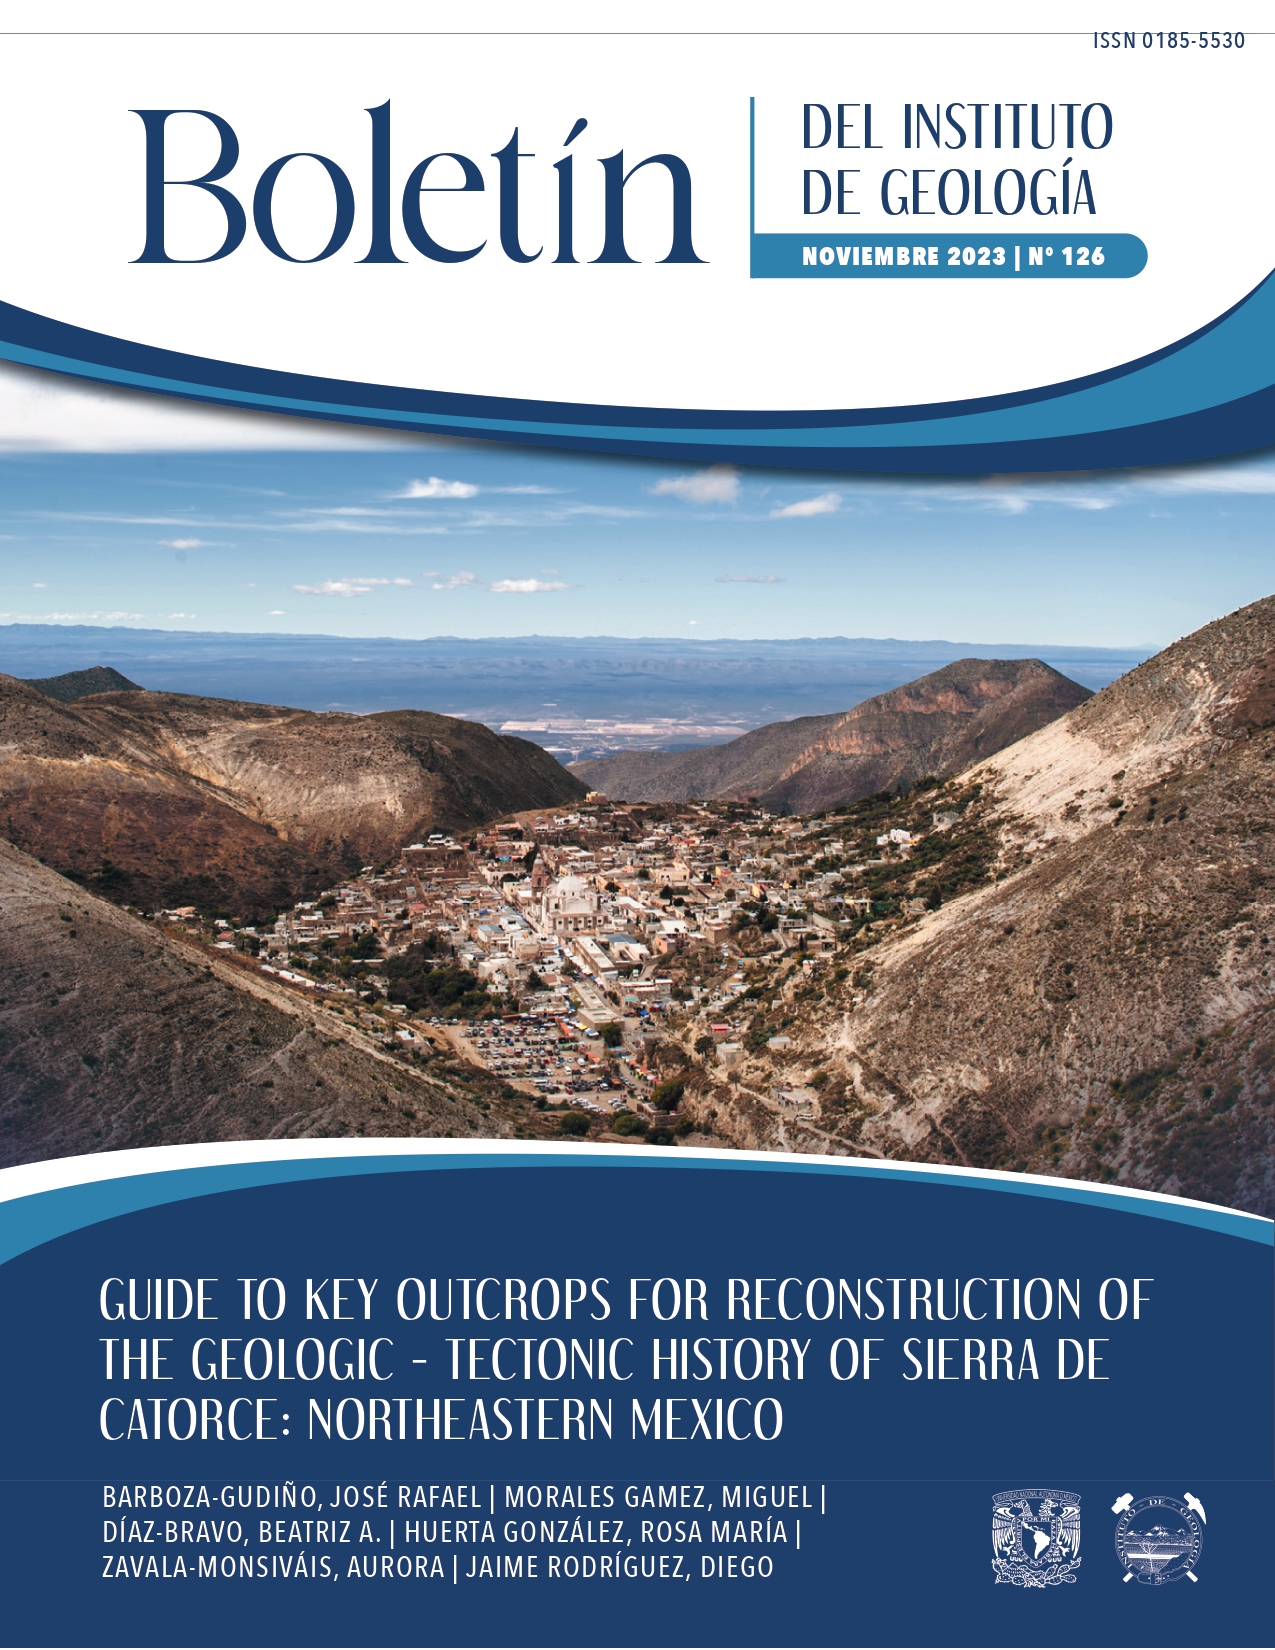 					View No. 126 (2023): Guide to Key Outcrops for Reconstruction of the Geologic-Tectonic  History of Sierra de Catorce: Northeastern Mexico
				